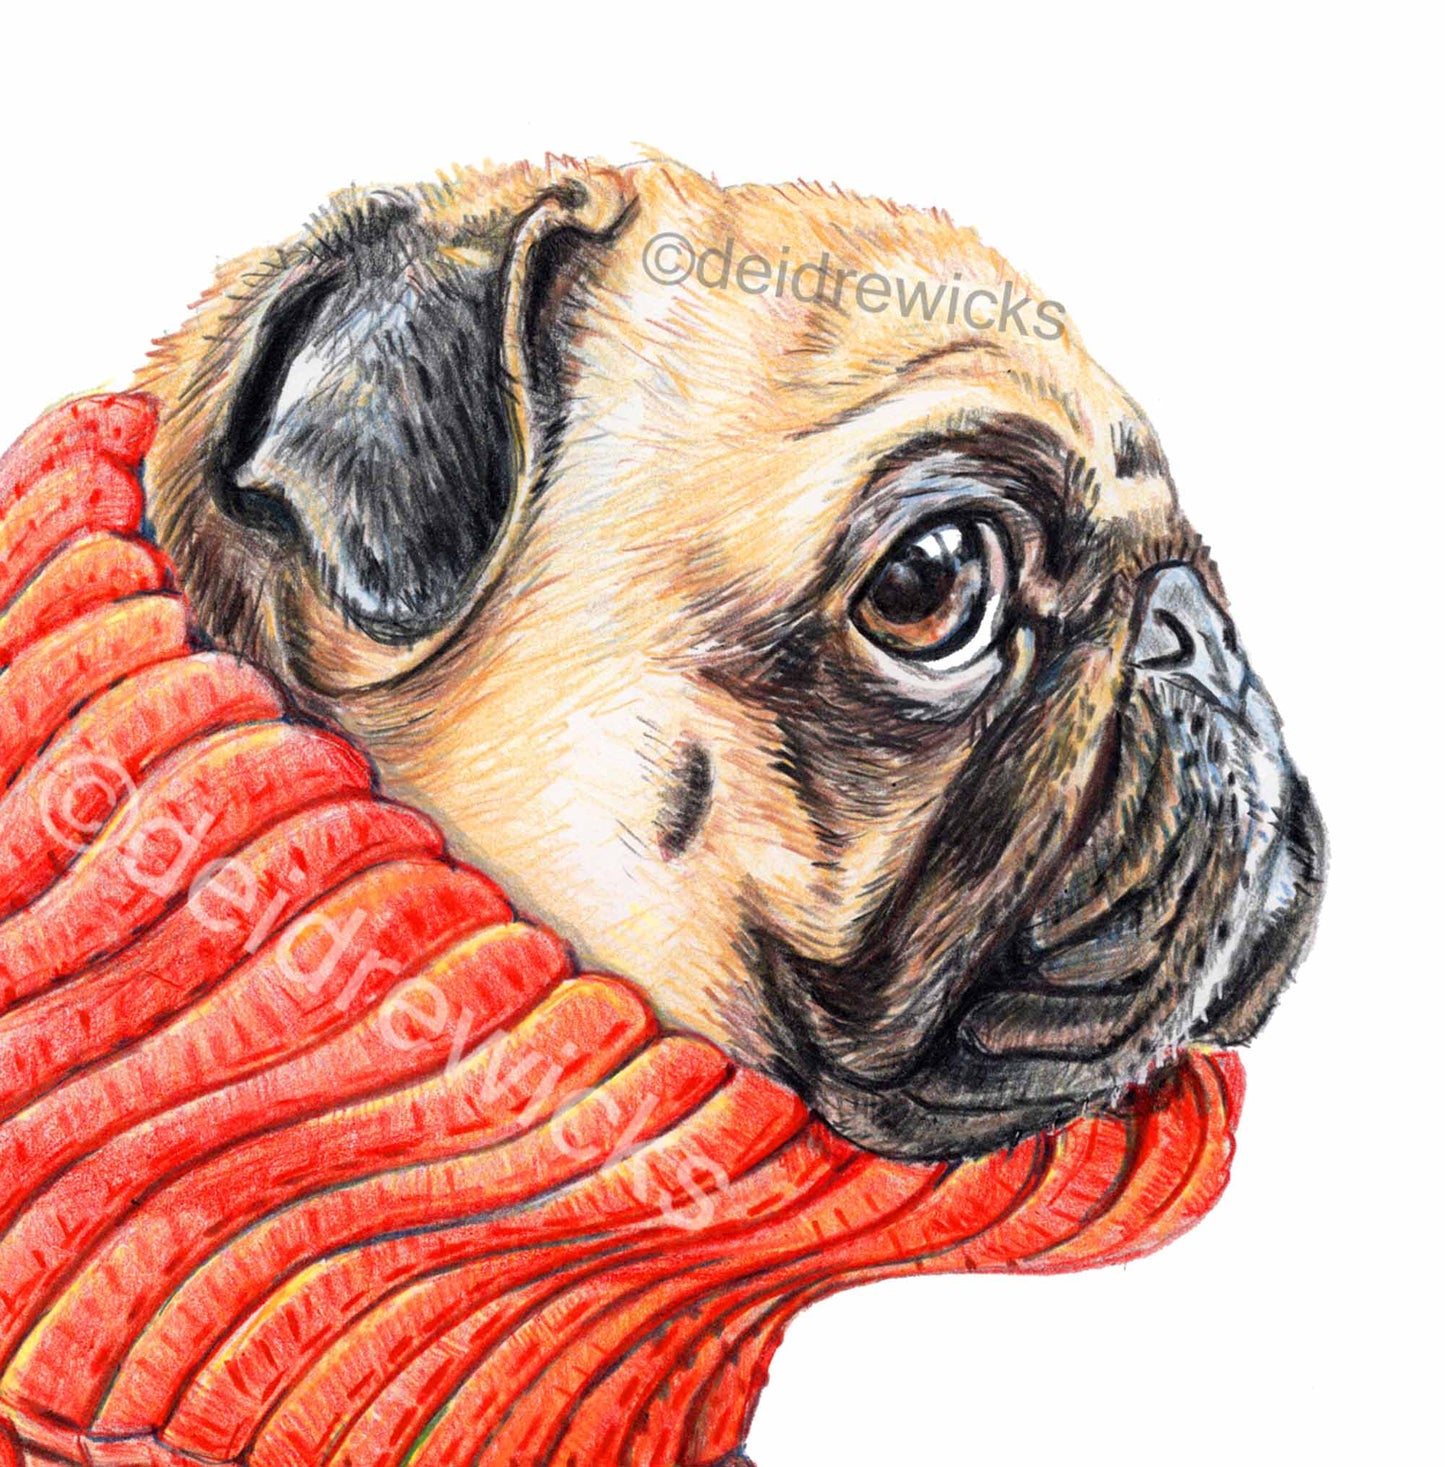 Coloured pencil drawing of a pug dog in profile wearing a red turtleneck sweater by Deidre Wicks